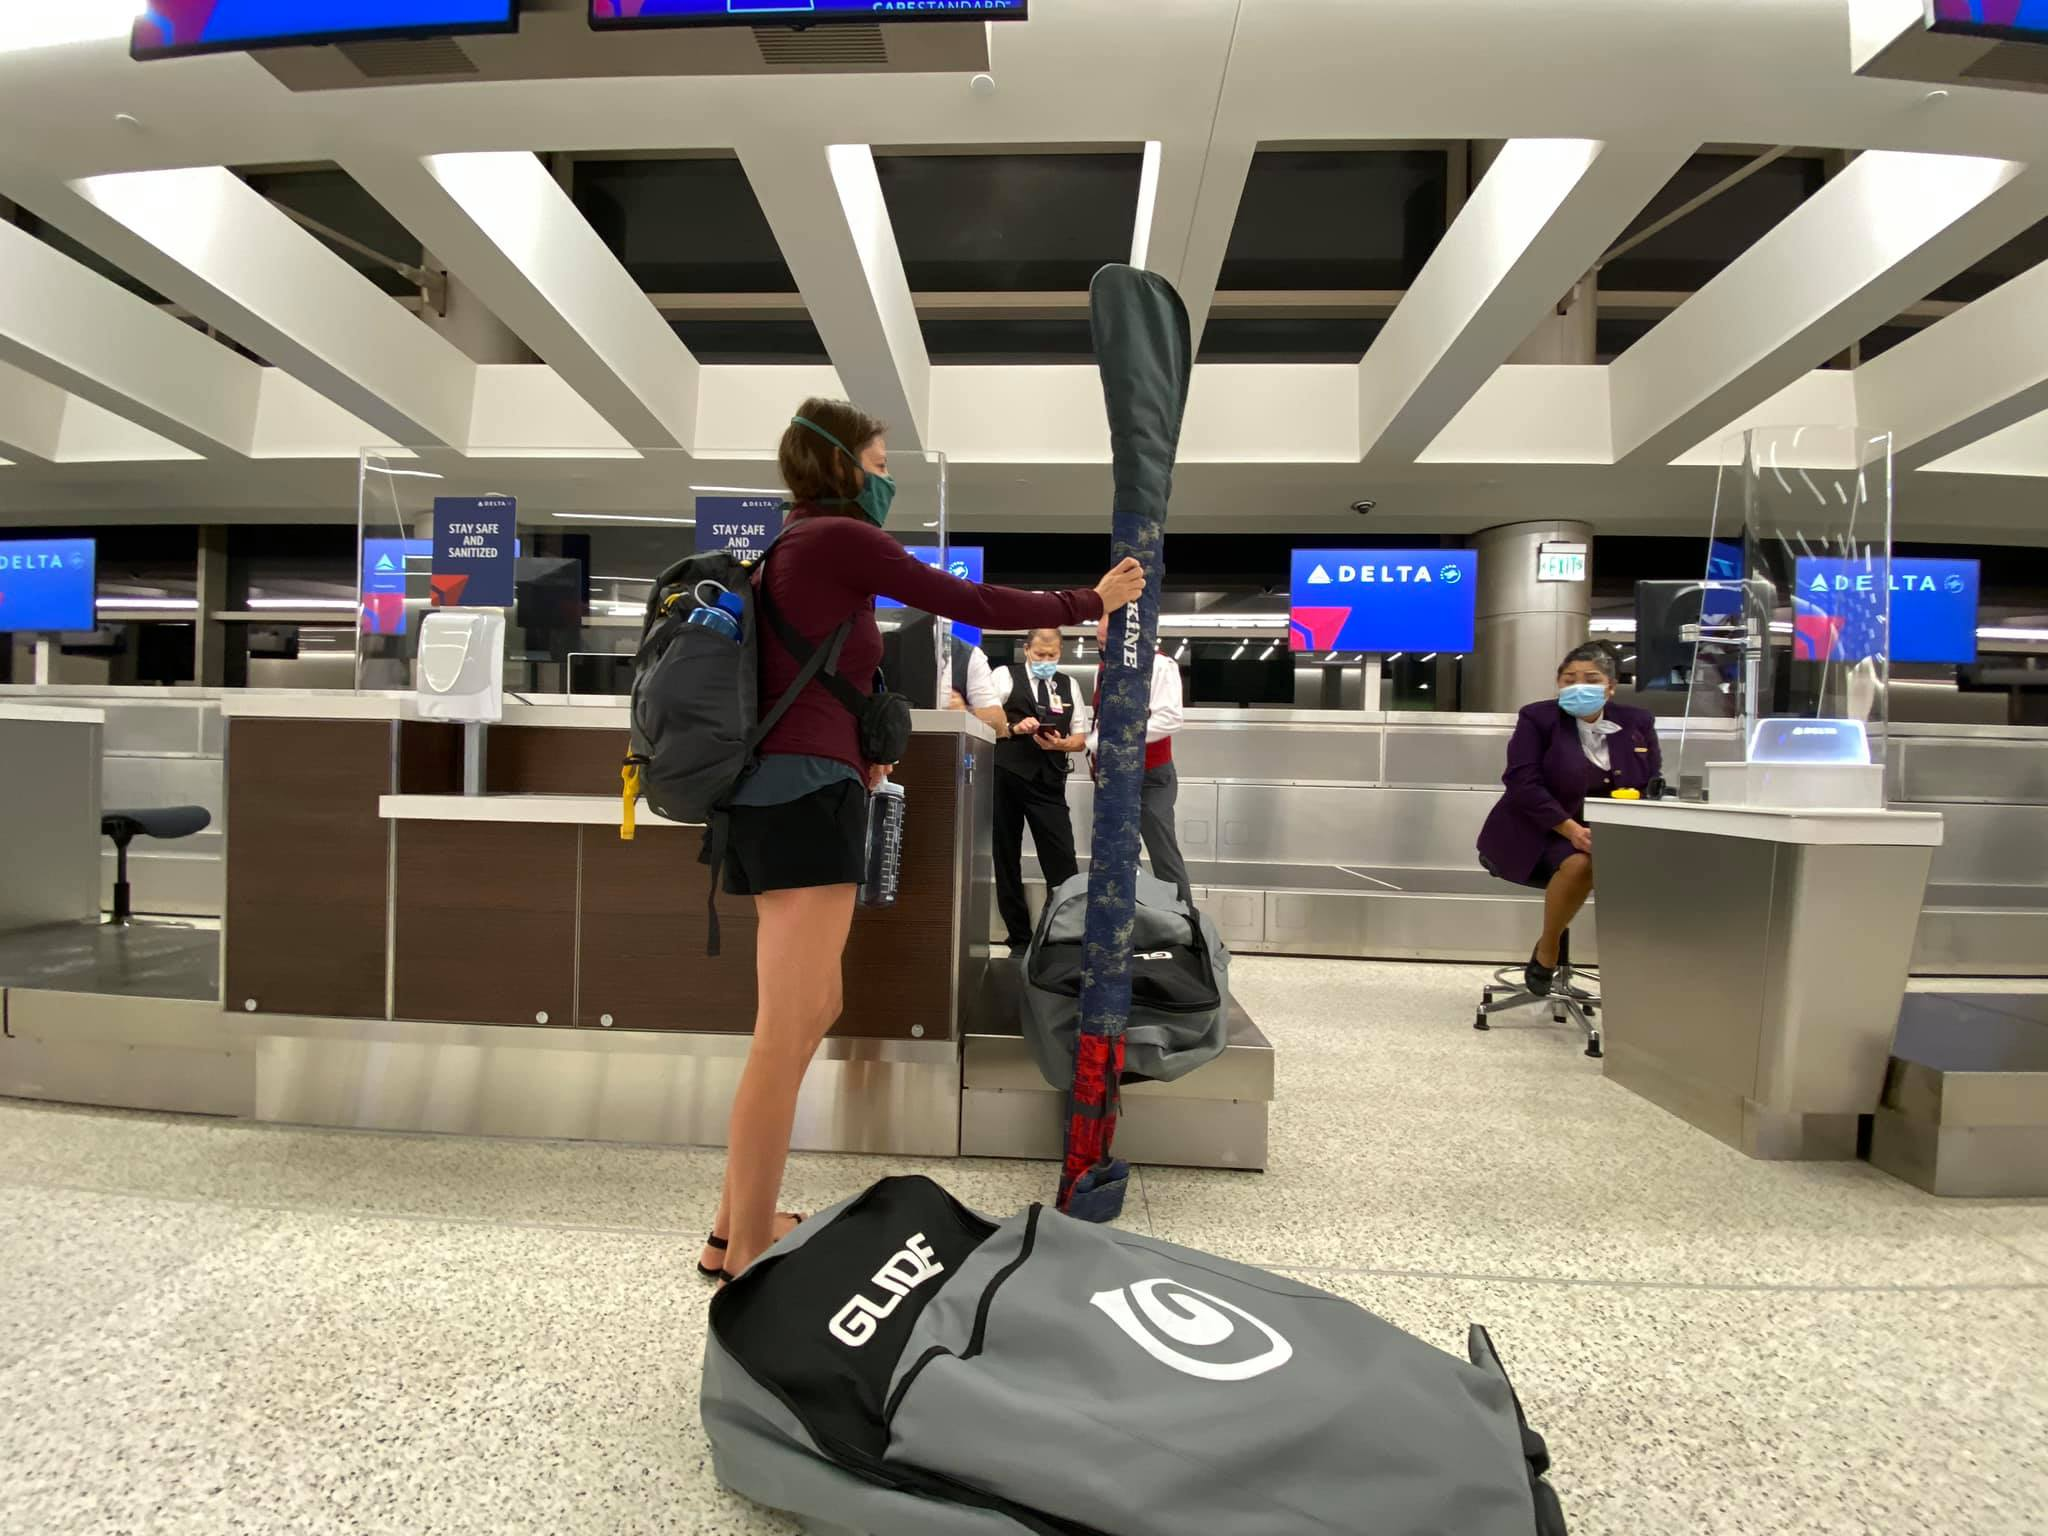 inflatable paddle board in a back pack